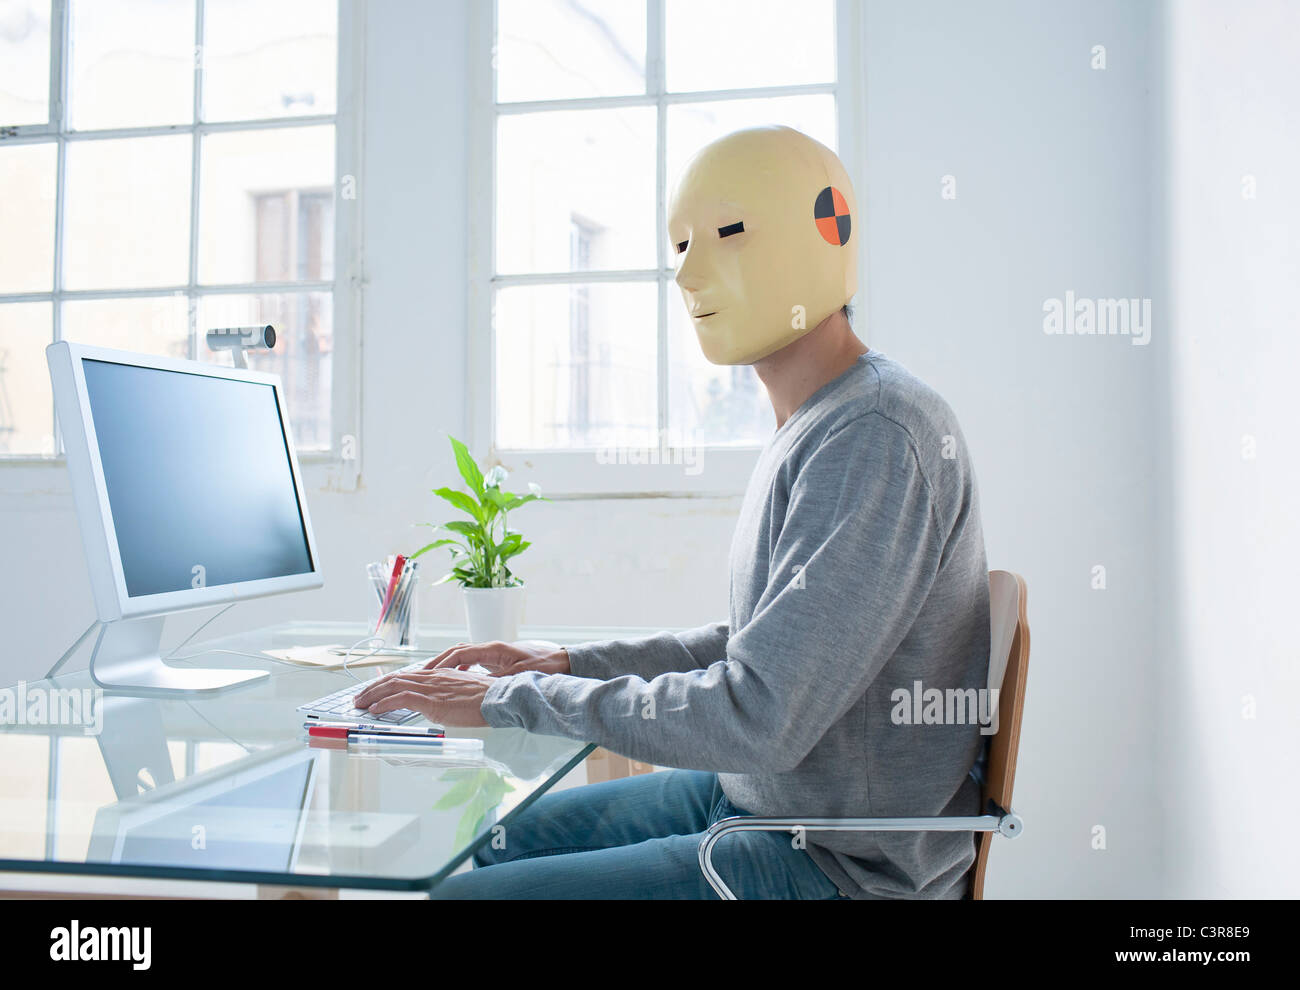 Man in crash test dummy mask in an office Stock Photo - Alamy